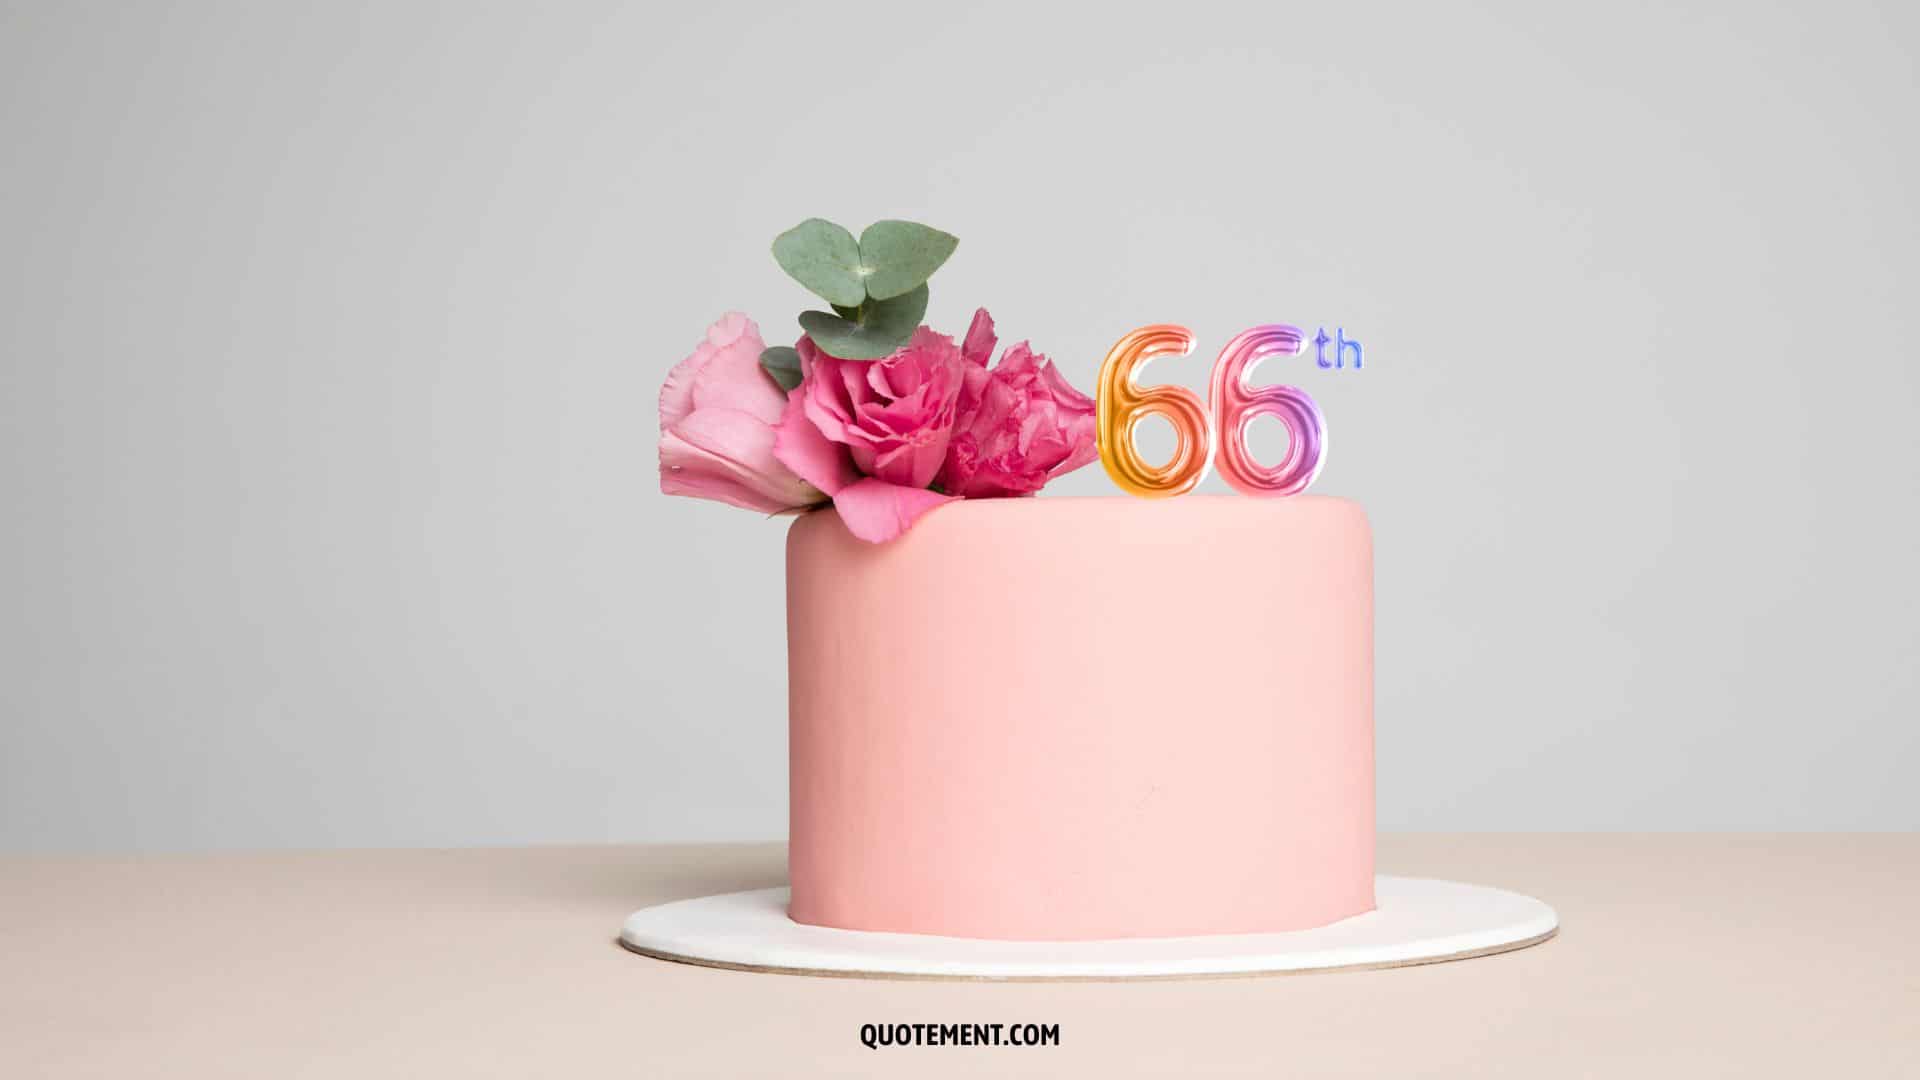 sweet wishes for 66 birthday